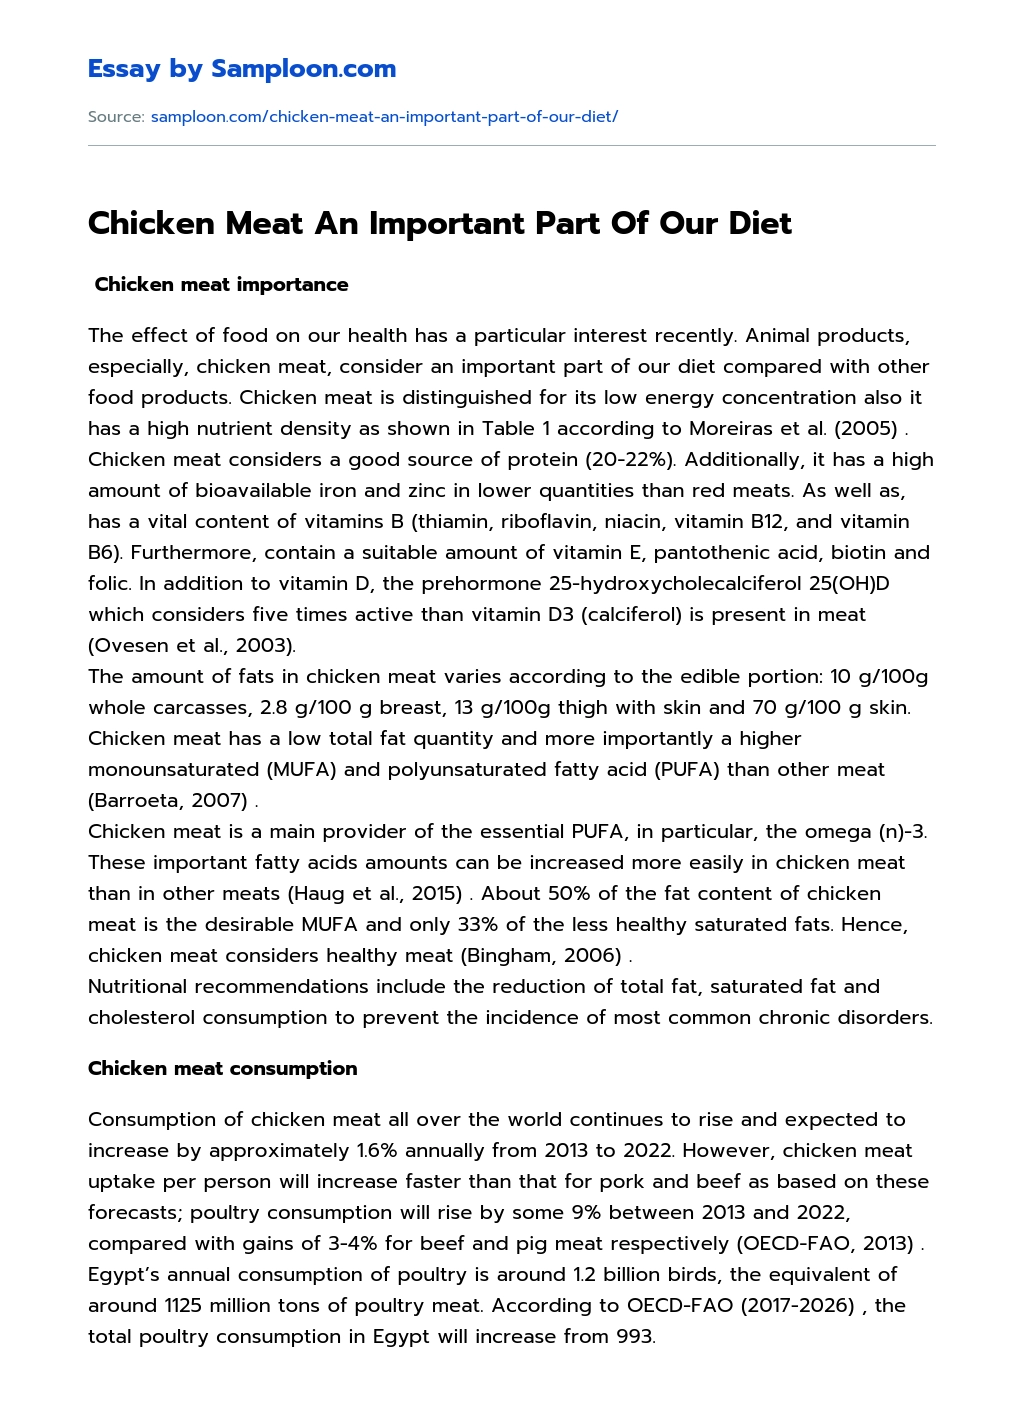 Chicken Meat An Important Part Of Our Diet essay